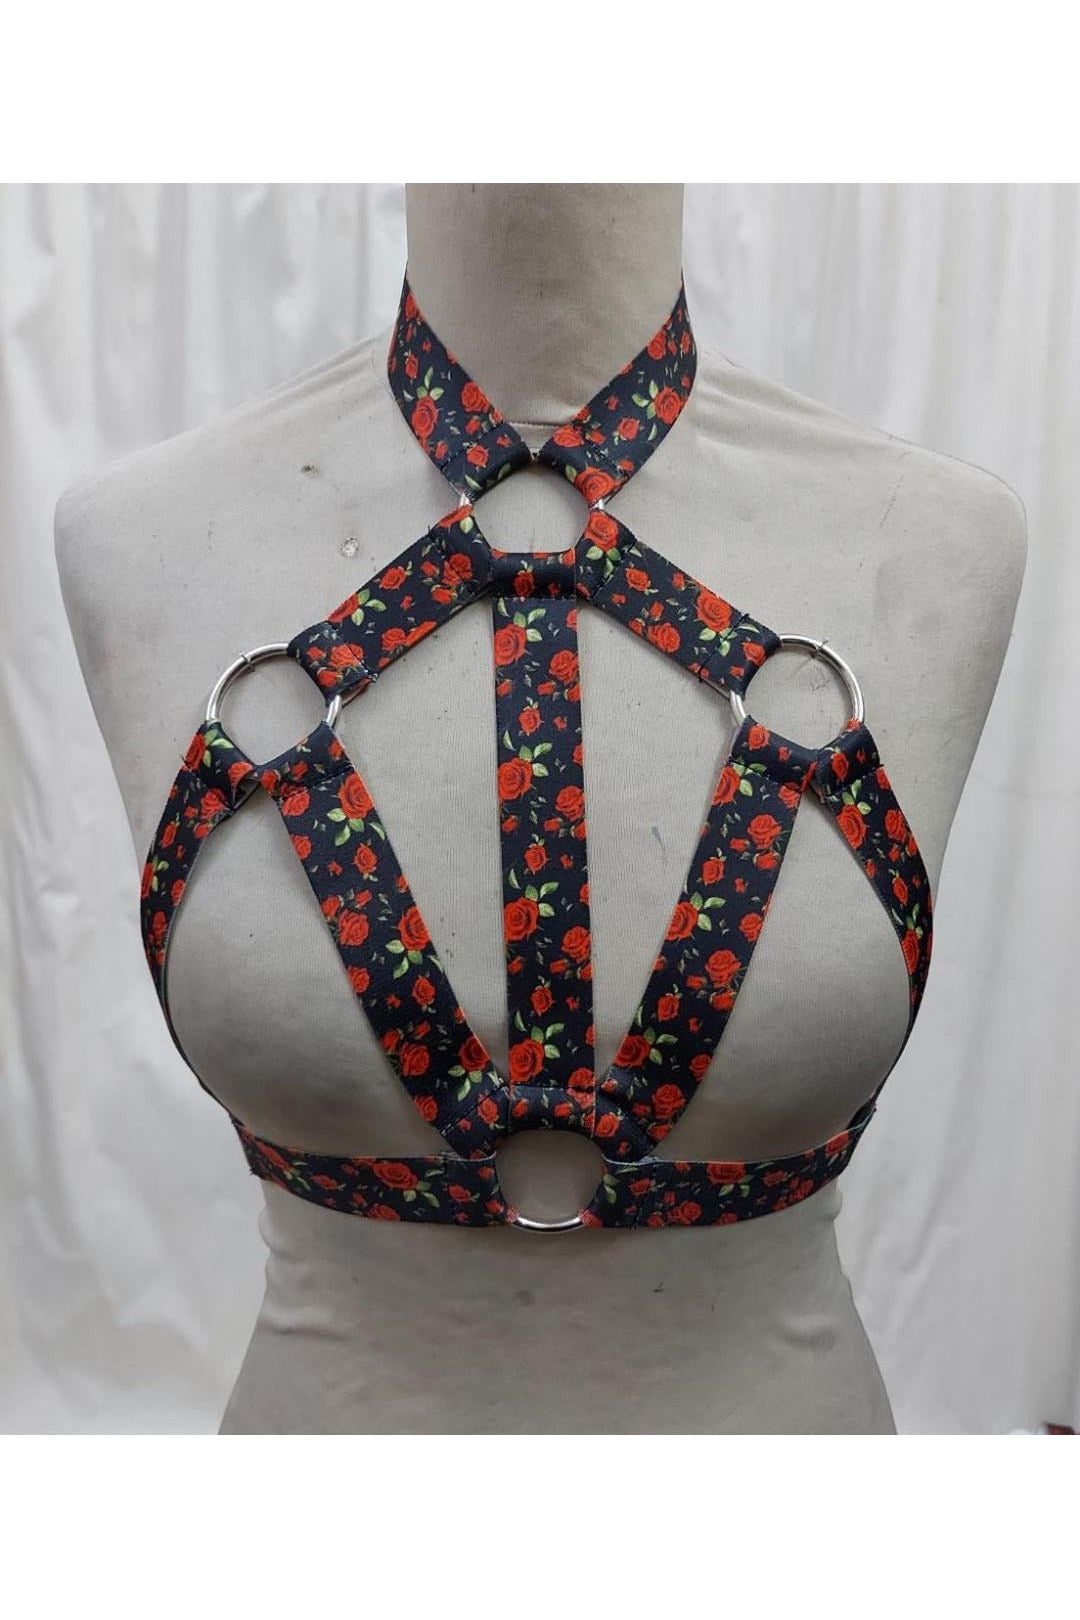 Red Roses Stretchy Body Harness w/Silver Hardware